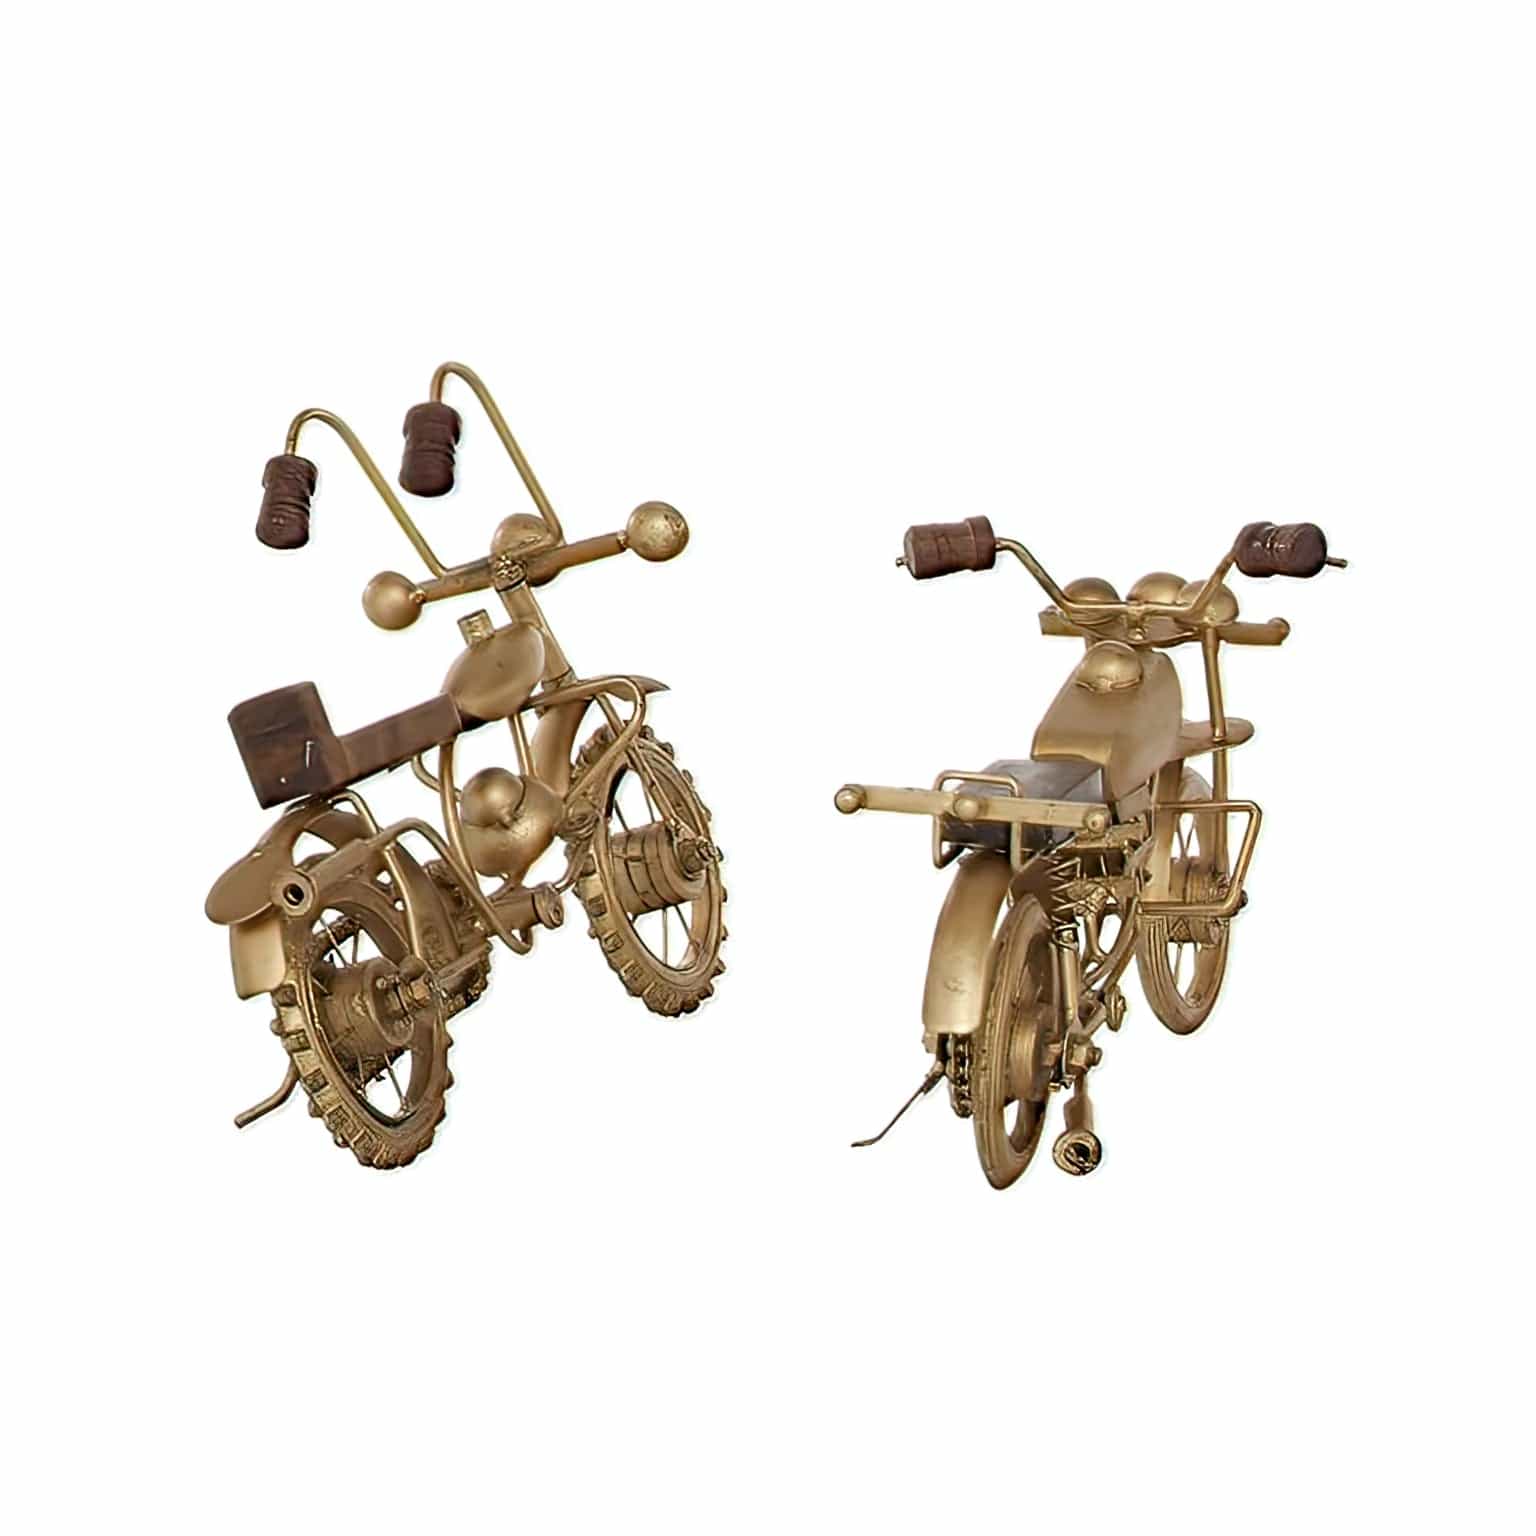 Gold Motorcycles Elevate Home Decor - Figurines